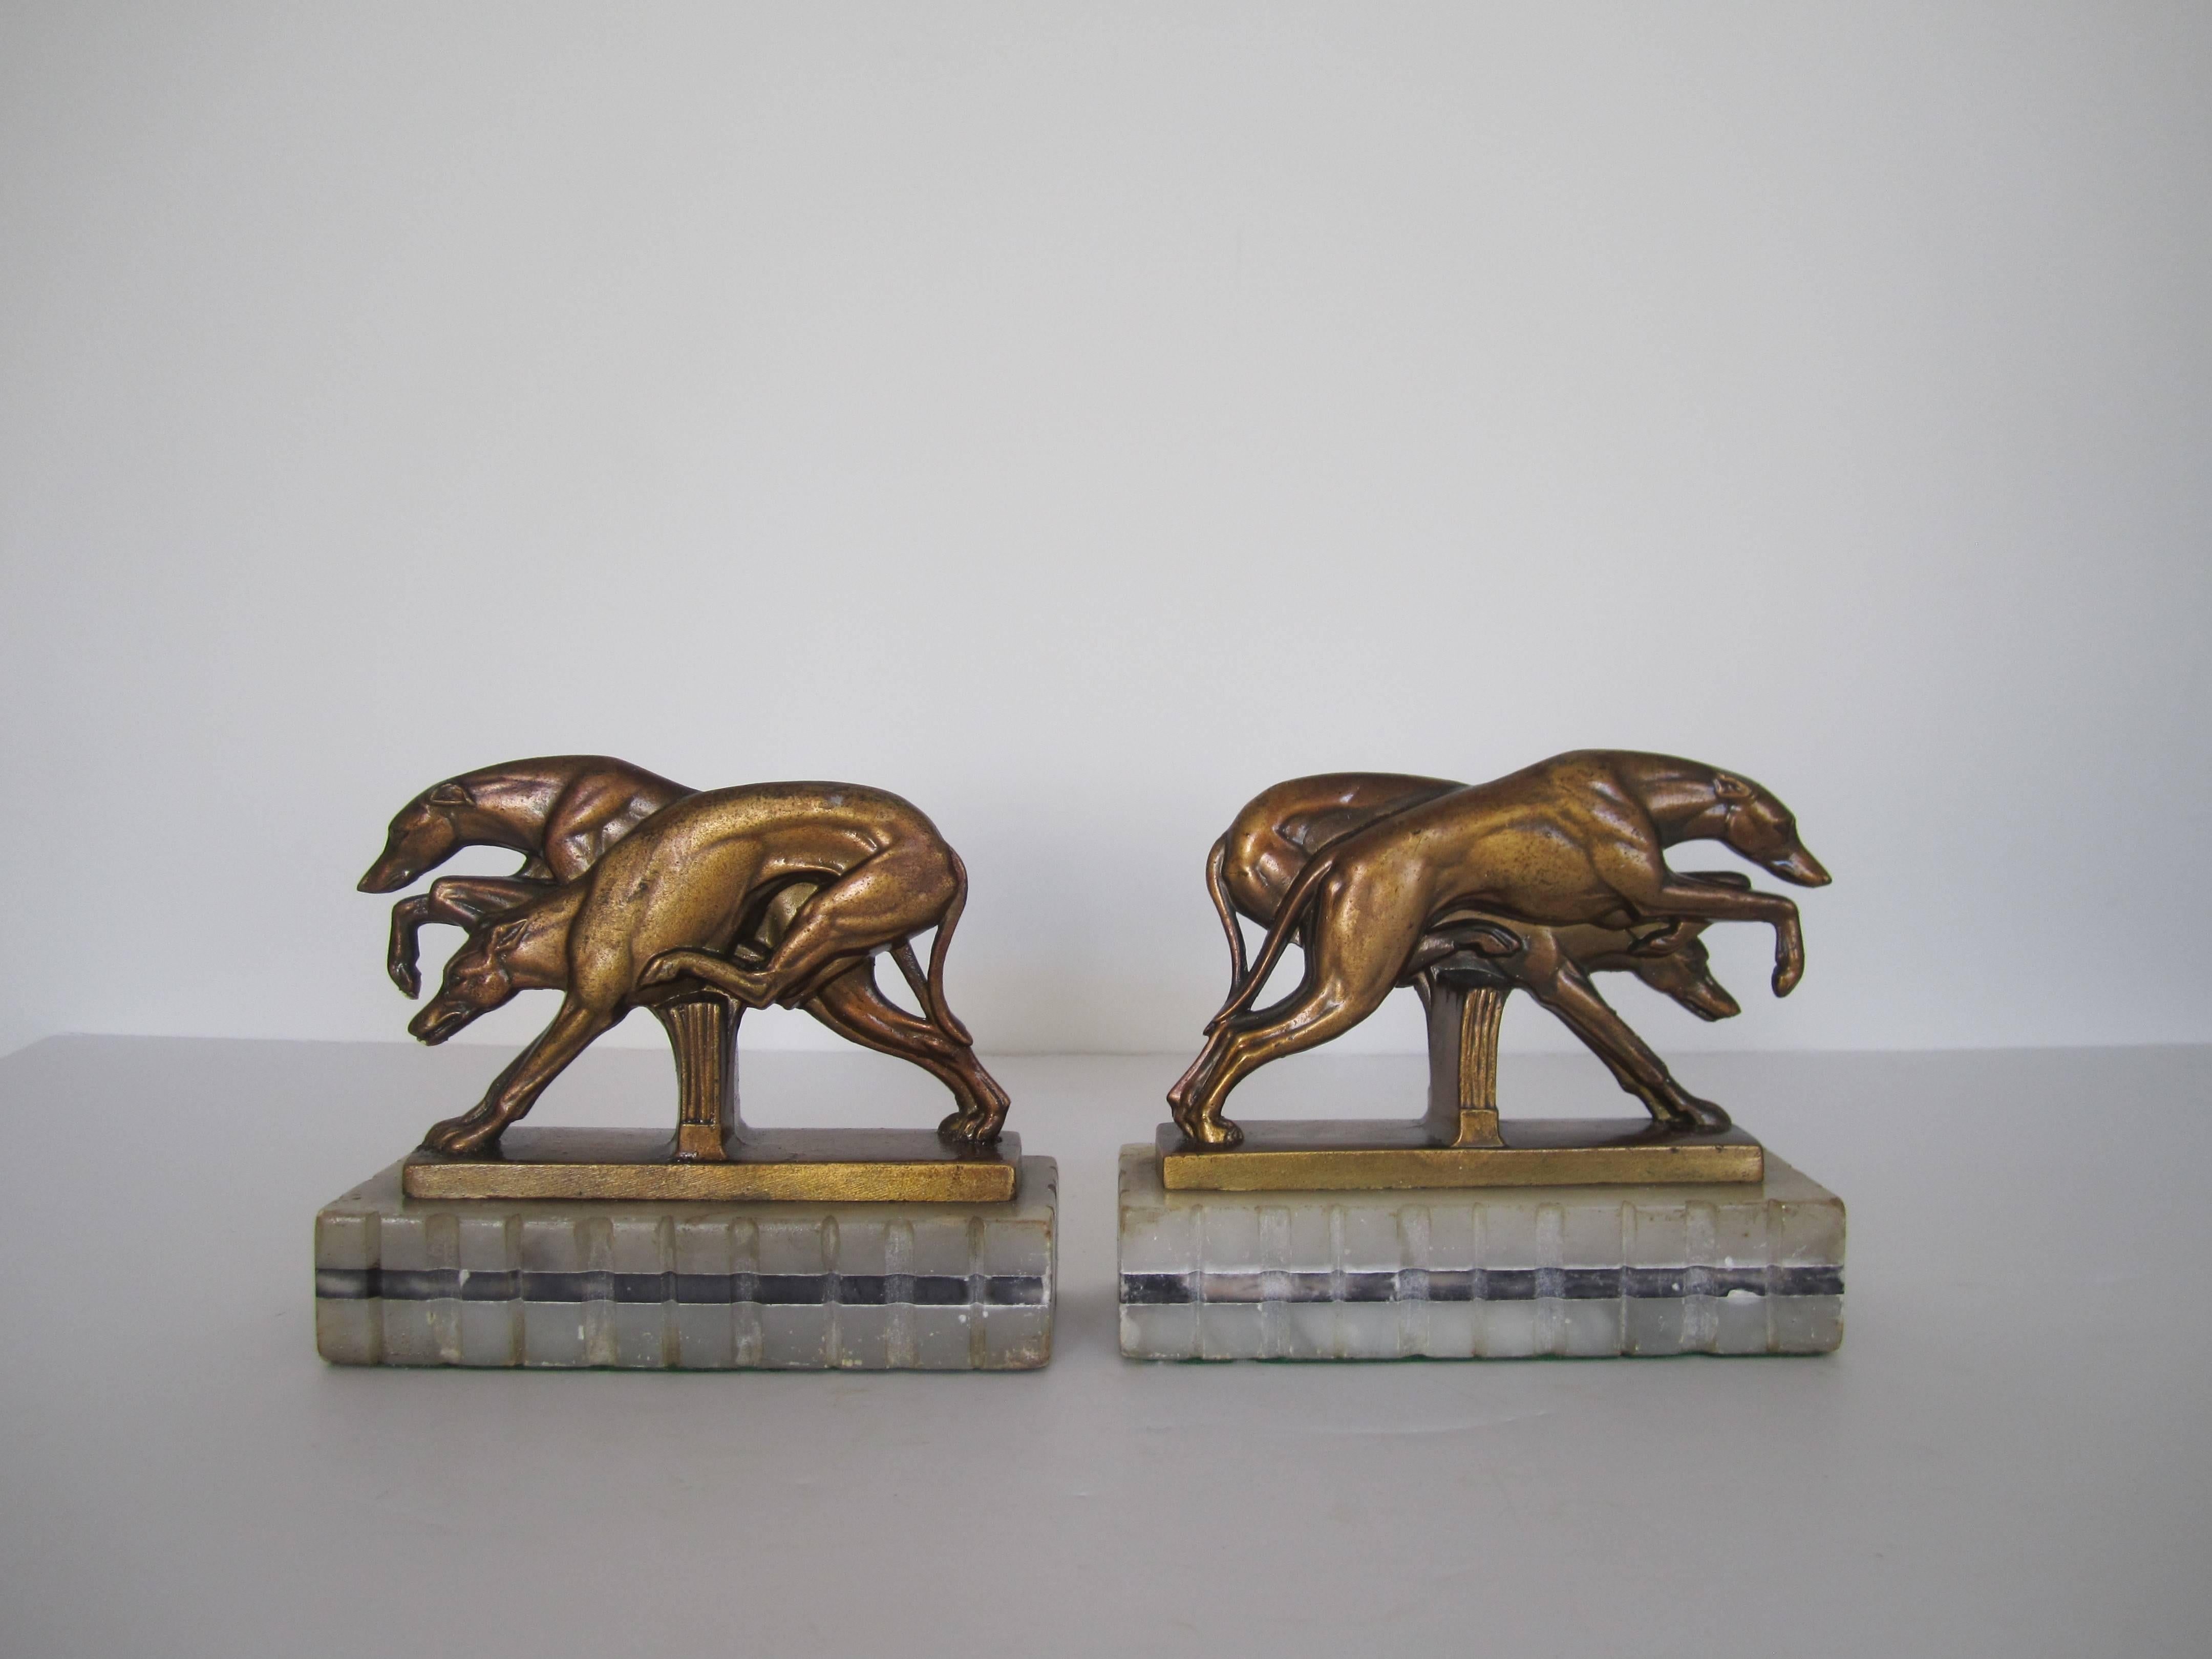 A beautiful pair of period Art Deco greyhound dog sculptures bookends on black and white marble bases, 1920s. Dogs pictured in motion atop rectangular ribbed white and back marble bases. Pair available here online. By request, pair can be made